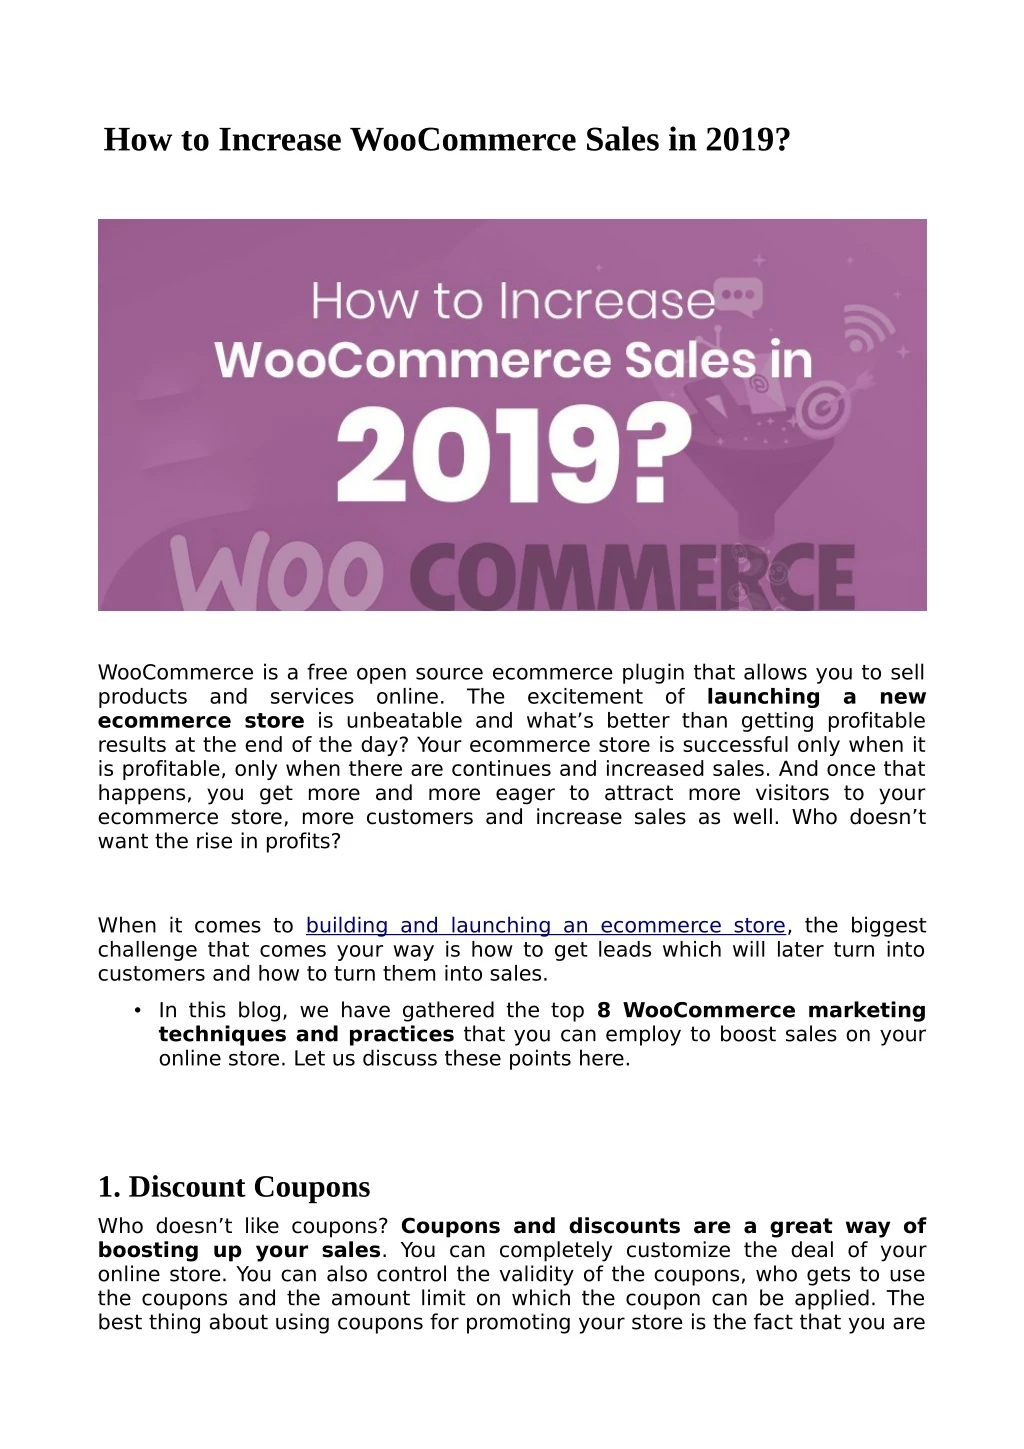 how to increase woocommerce sales in 2019